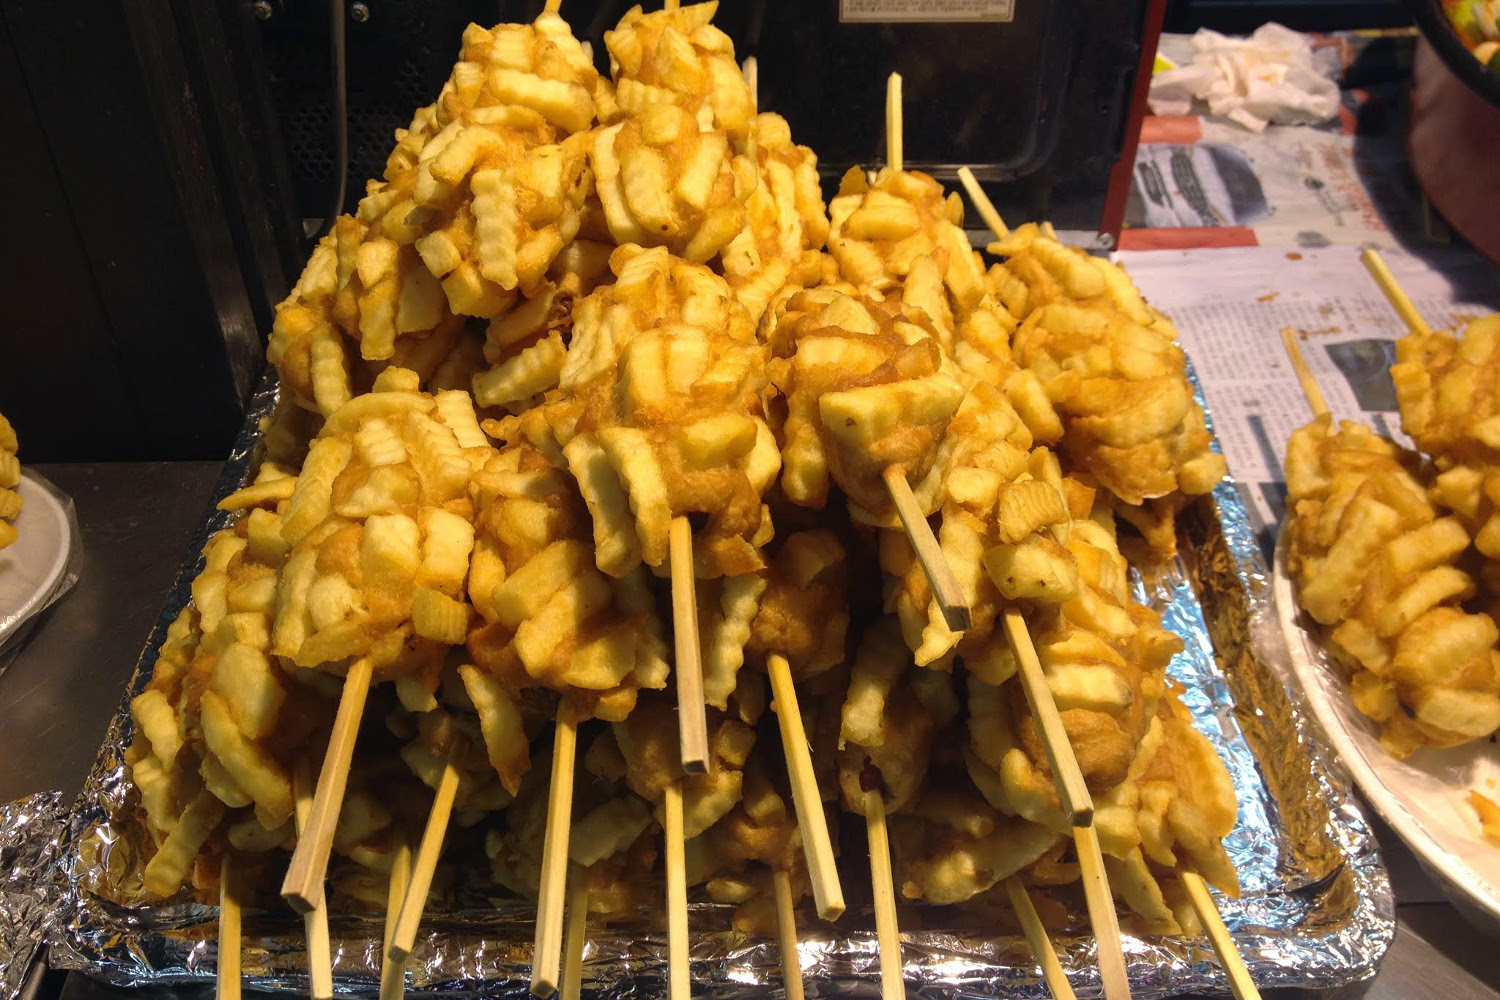 Epic corn dog covered in fries and served on a stick. Image by Megan Eaves / Lonely Planet